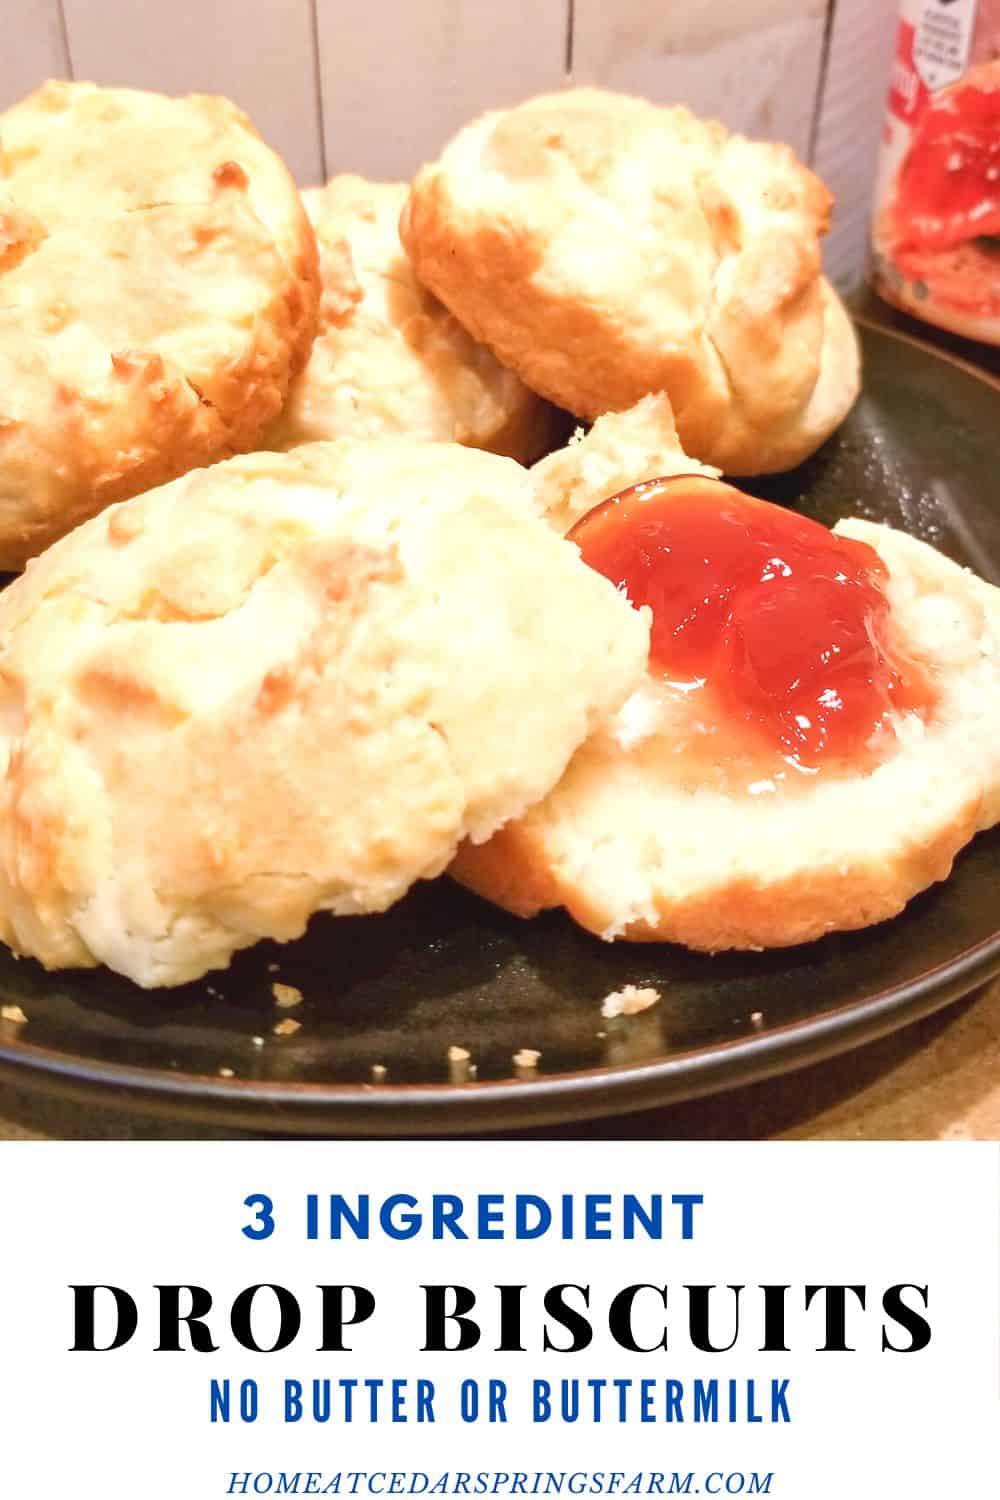 3 Ingredient Drop Biscuits on a black plate with strawberry jam and text overlay.